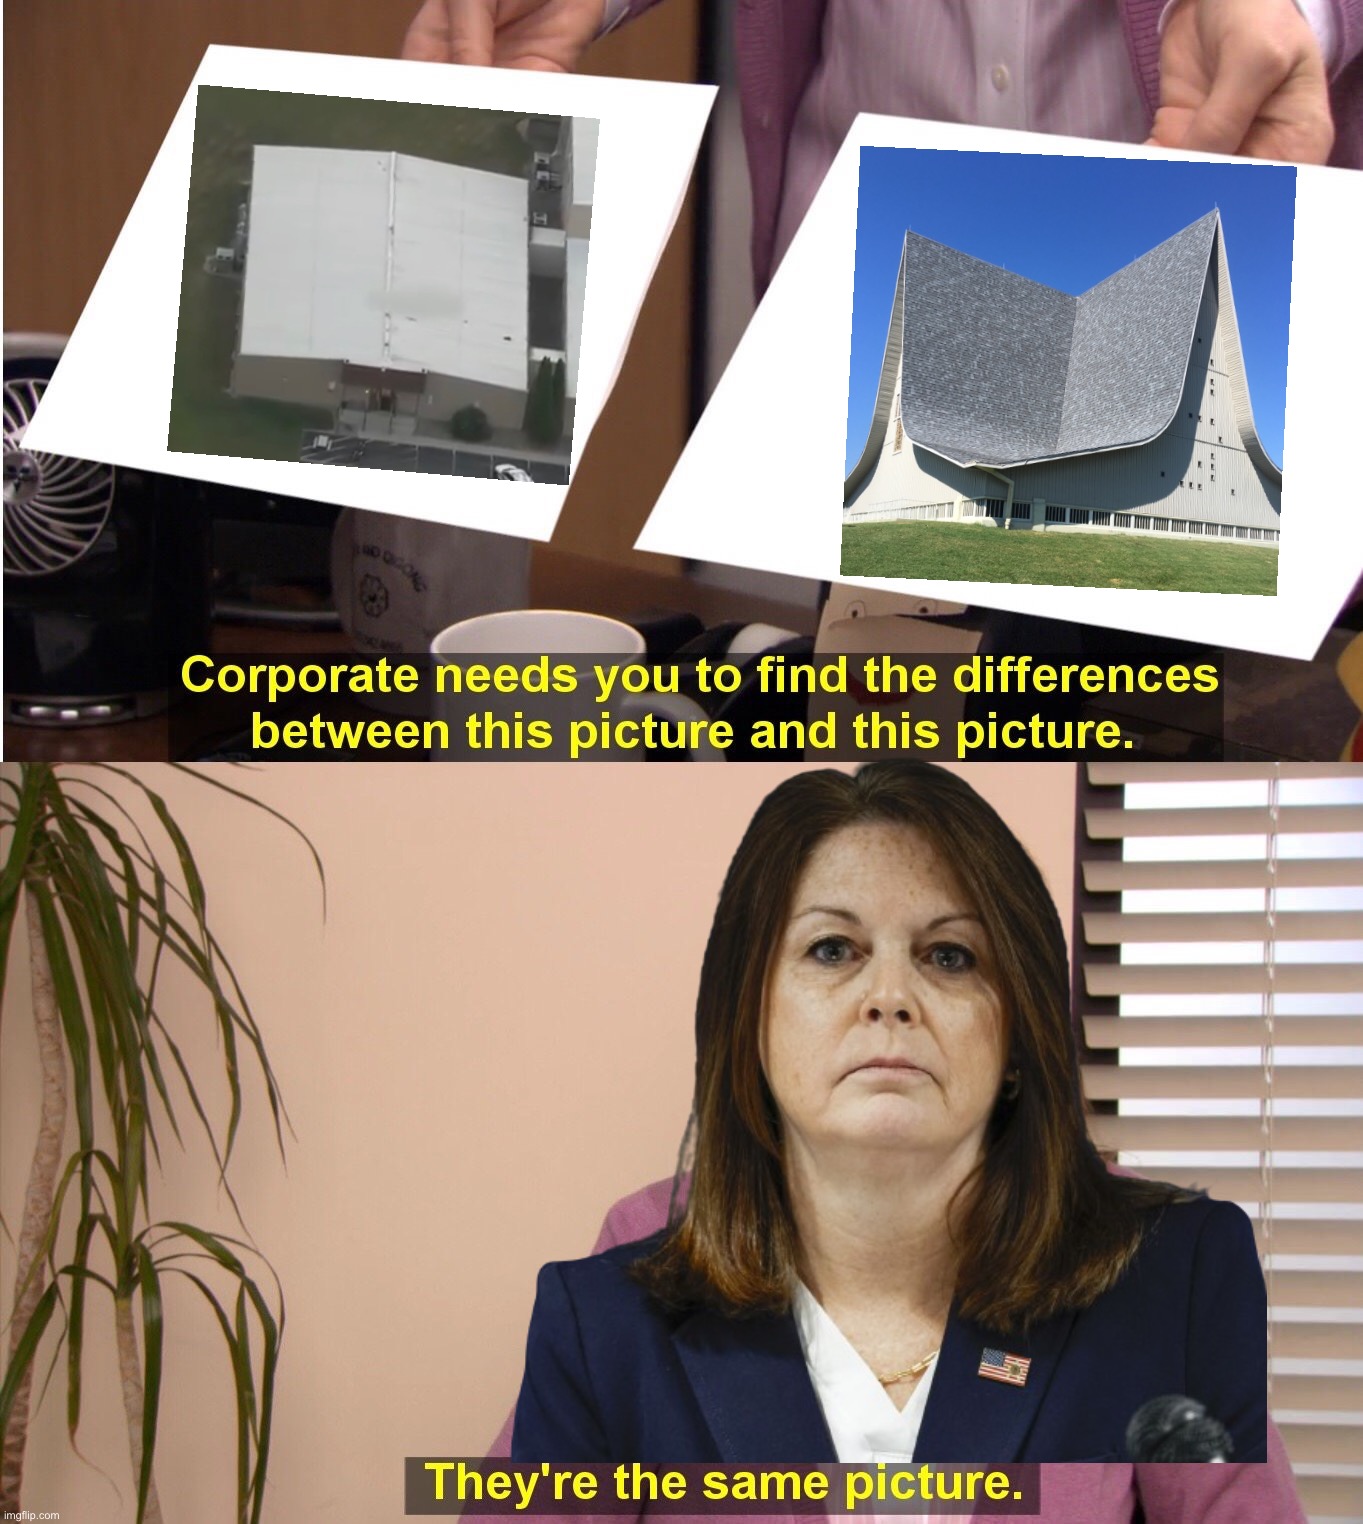 ThE rOoF WaS sLoPeD | image tagged in memes,they're the same picture,trump,donald trump,funny,funny memes | made w/ Imgflip meme maker